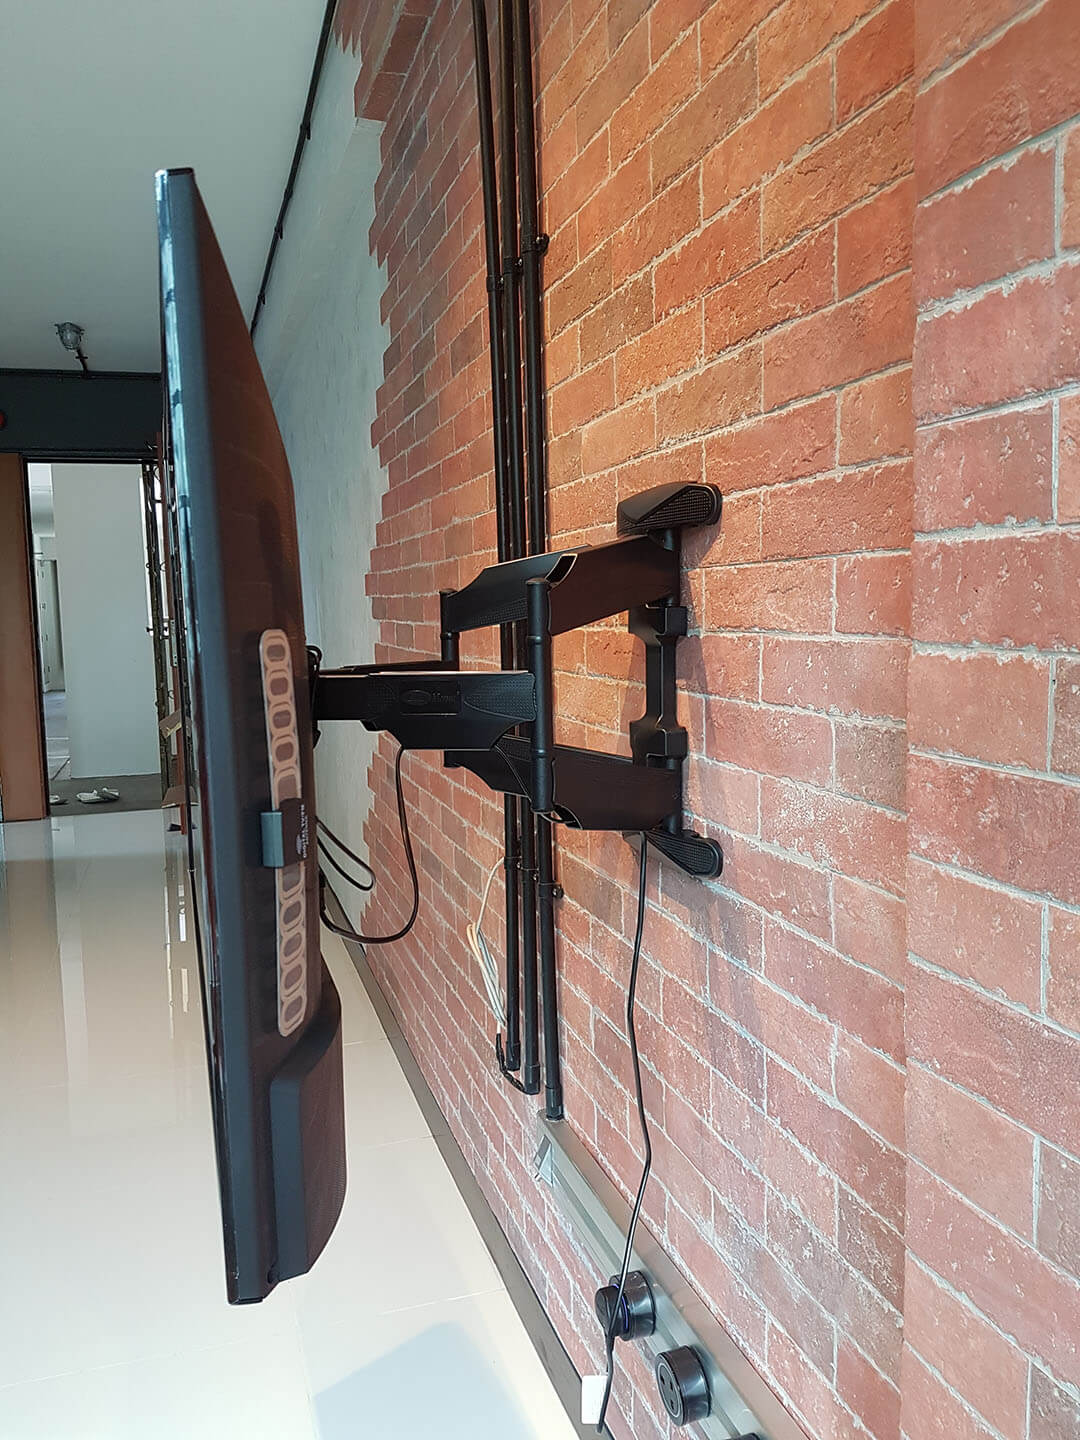 Top Reasons For Buying A Full Motion TV Mount